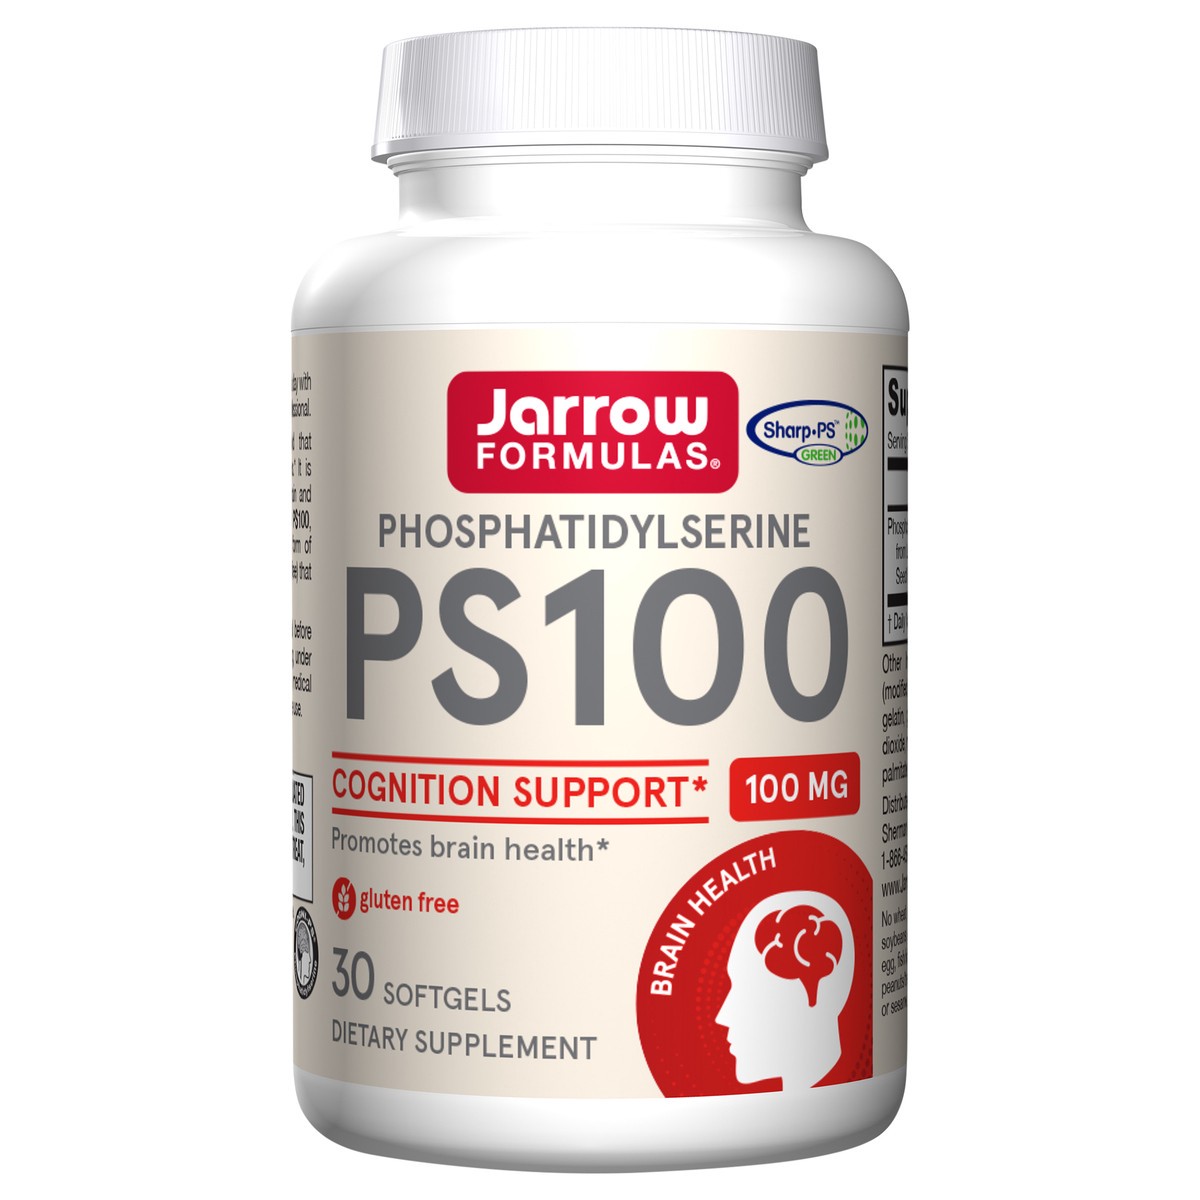 slide 1 of 2, Jarrow Formulas PS100 - 100 mg Phosphatidylserine (PS) from Sunflower Lecithin (Soy-Free) - 30 Servings (Softgels) - Promotes Brain Health & Cognition Support - Dietary Supplement - Gluten Free, 30 ct